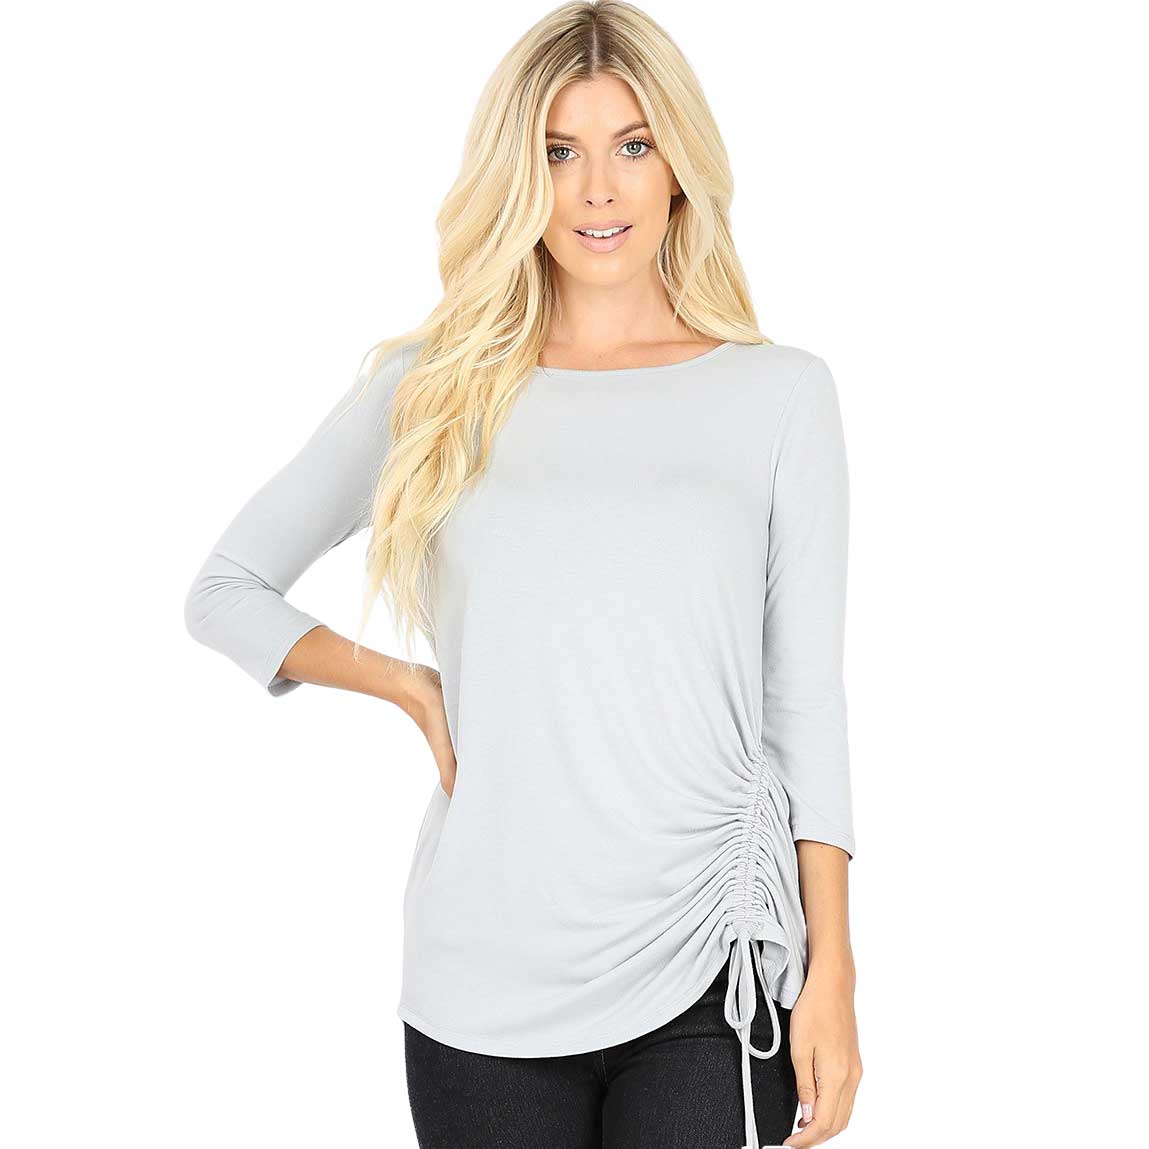 1887 - 3/4 Sleeve Ruched Tops LIGHT GREY 3/4 Sleeve Round Neck Side Ruched 1887 - Small